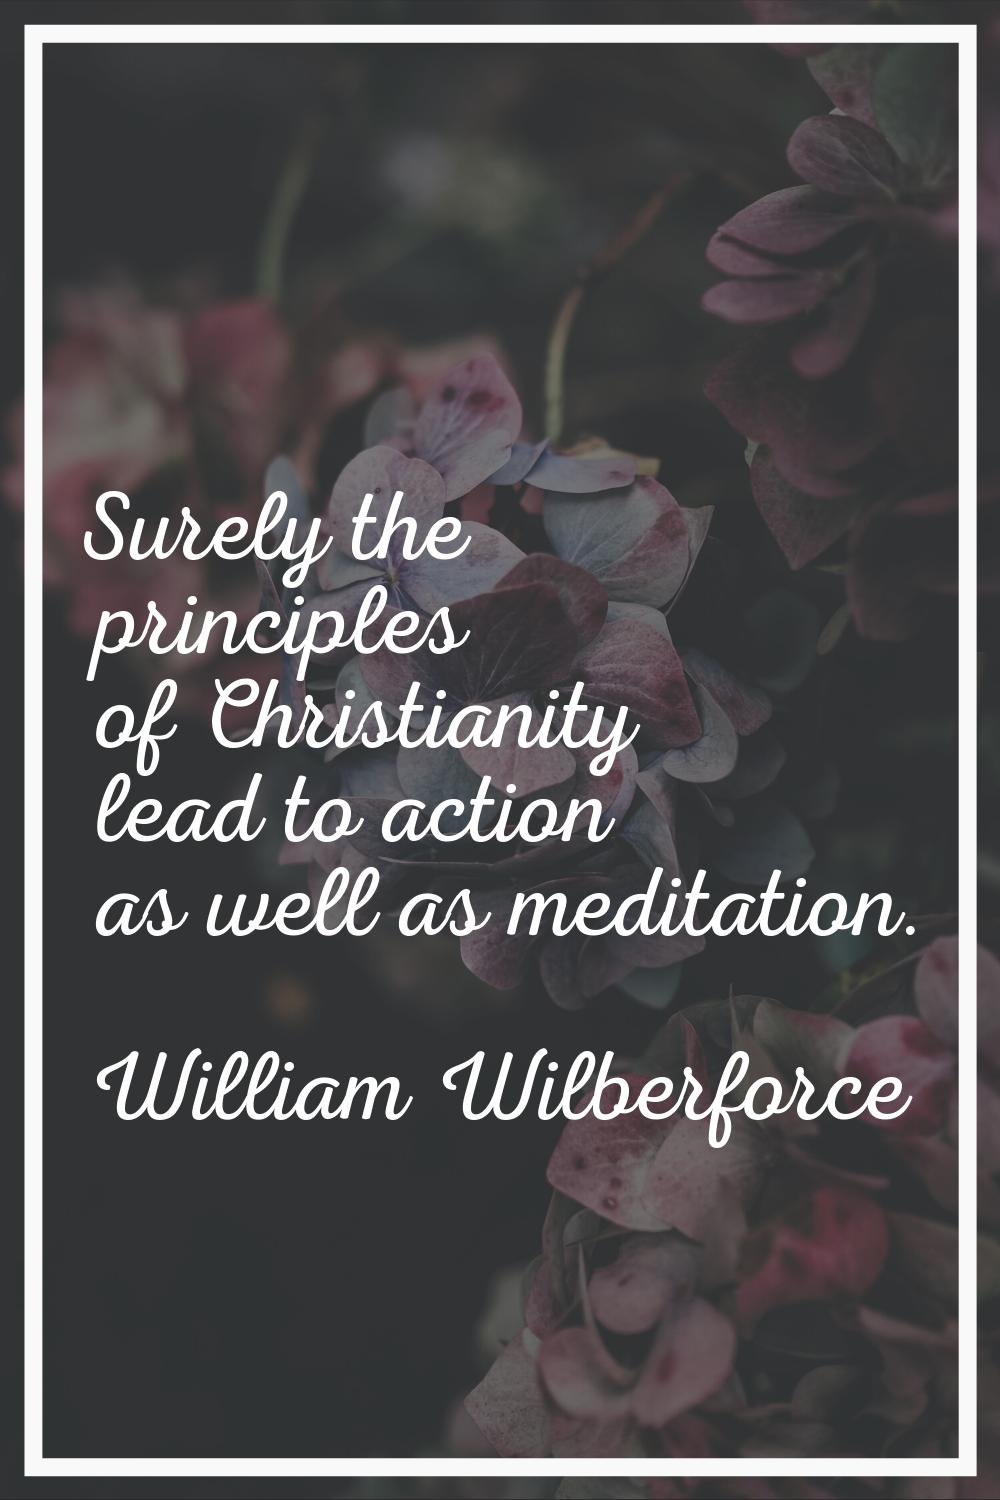 Surely the principles of Christianity lead to action as well as meditation.